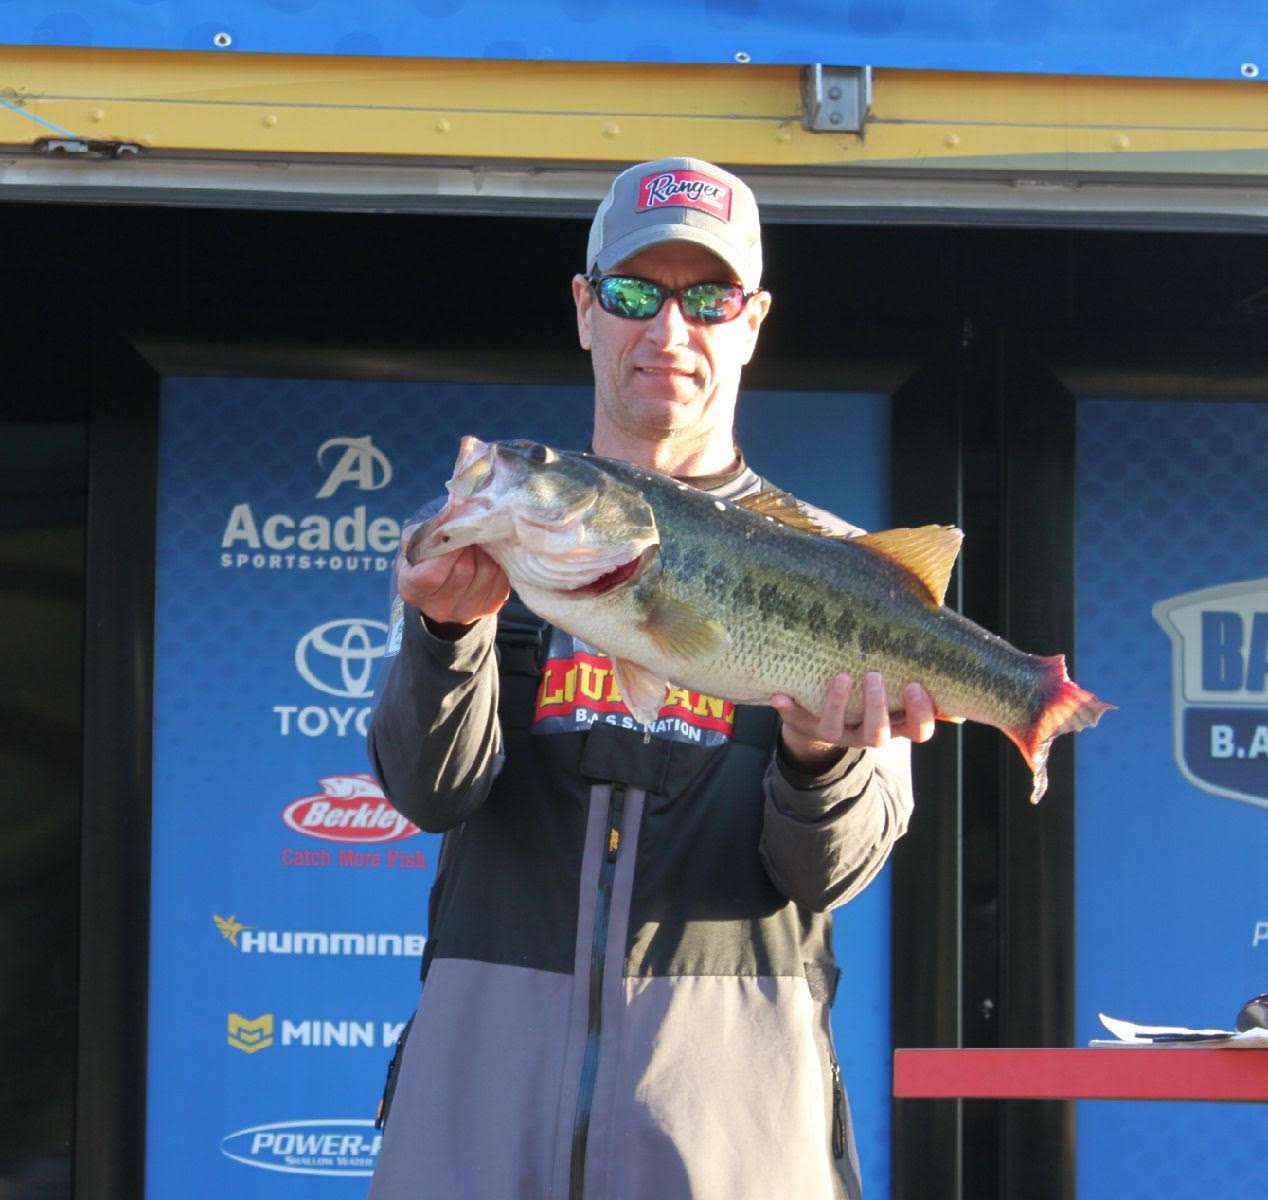 Michael Nobile of Team Louisiana caught the biggest bass of the day â this 8-15 monster that put him in fourth place among non-boaters with a 13-10 total.